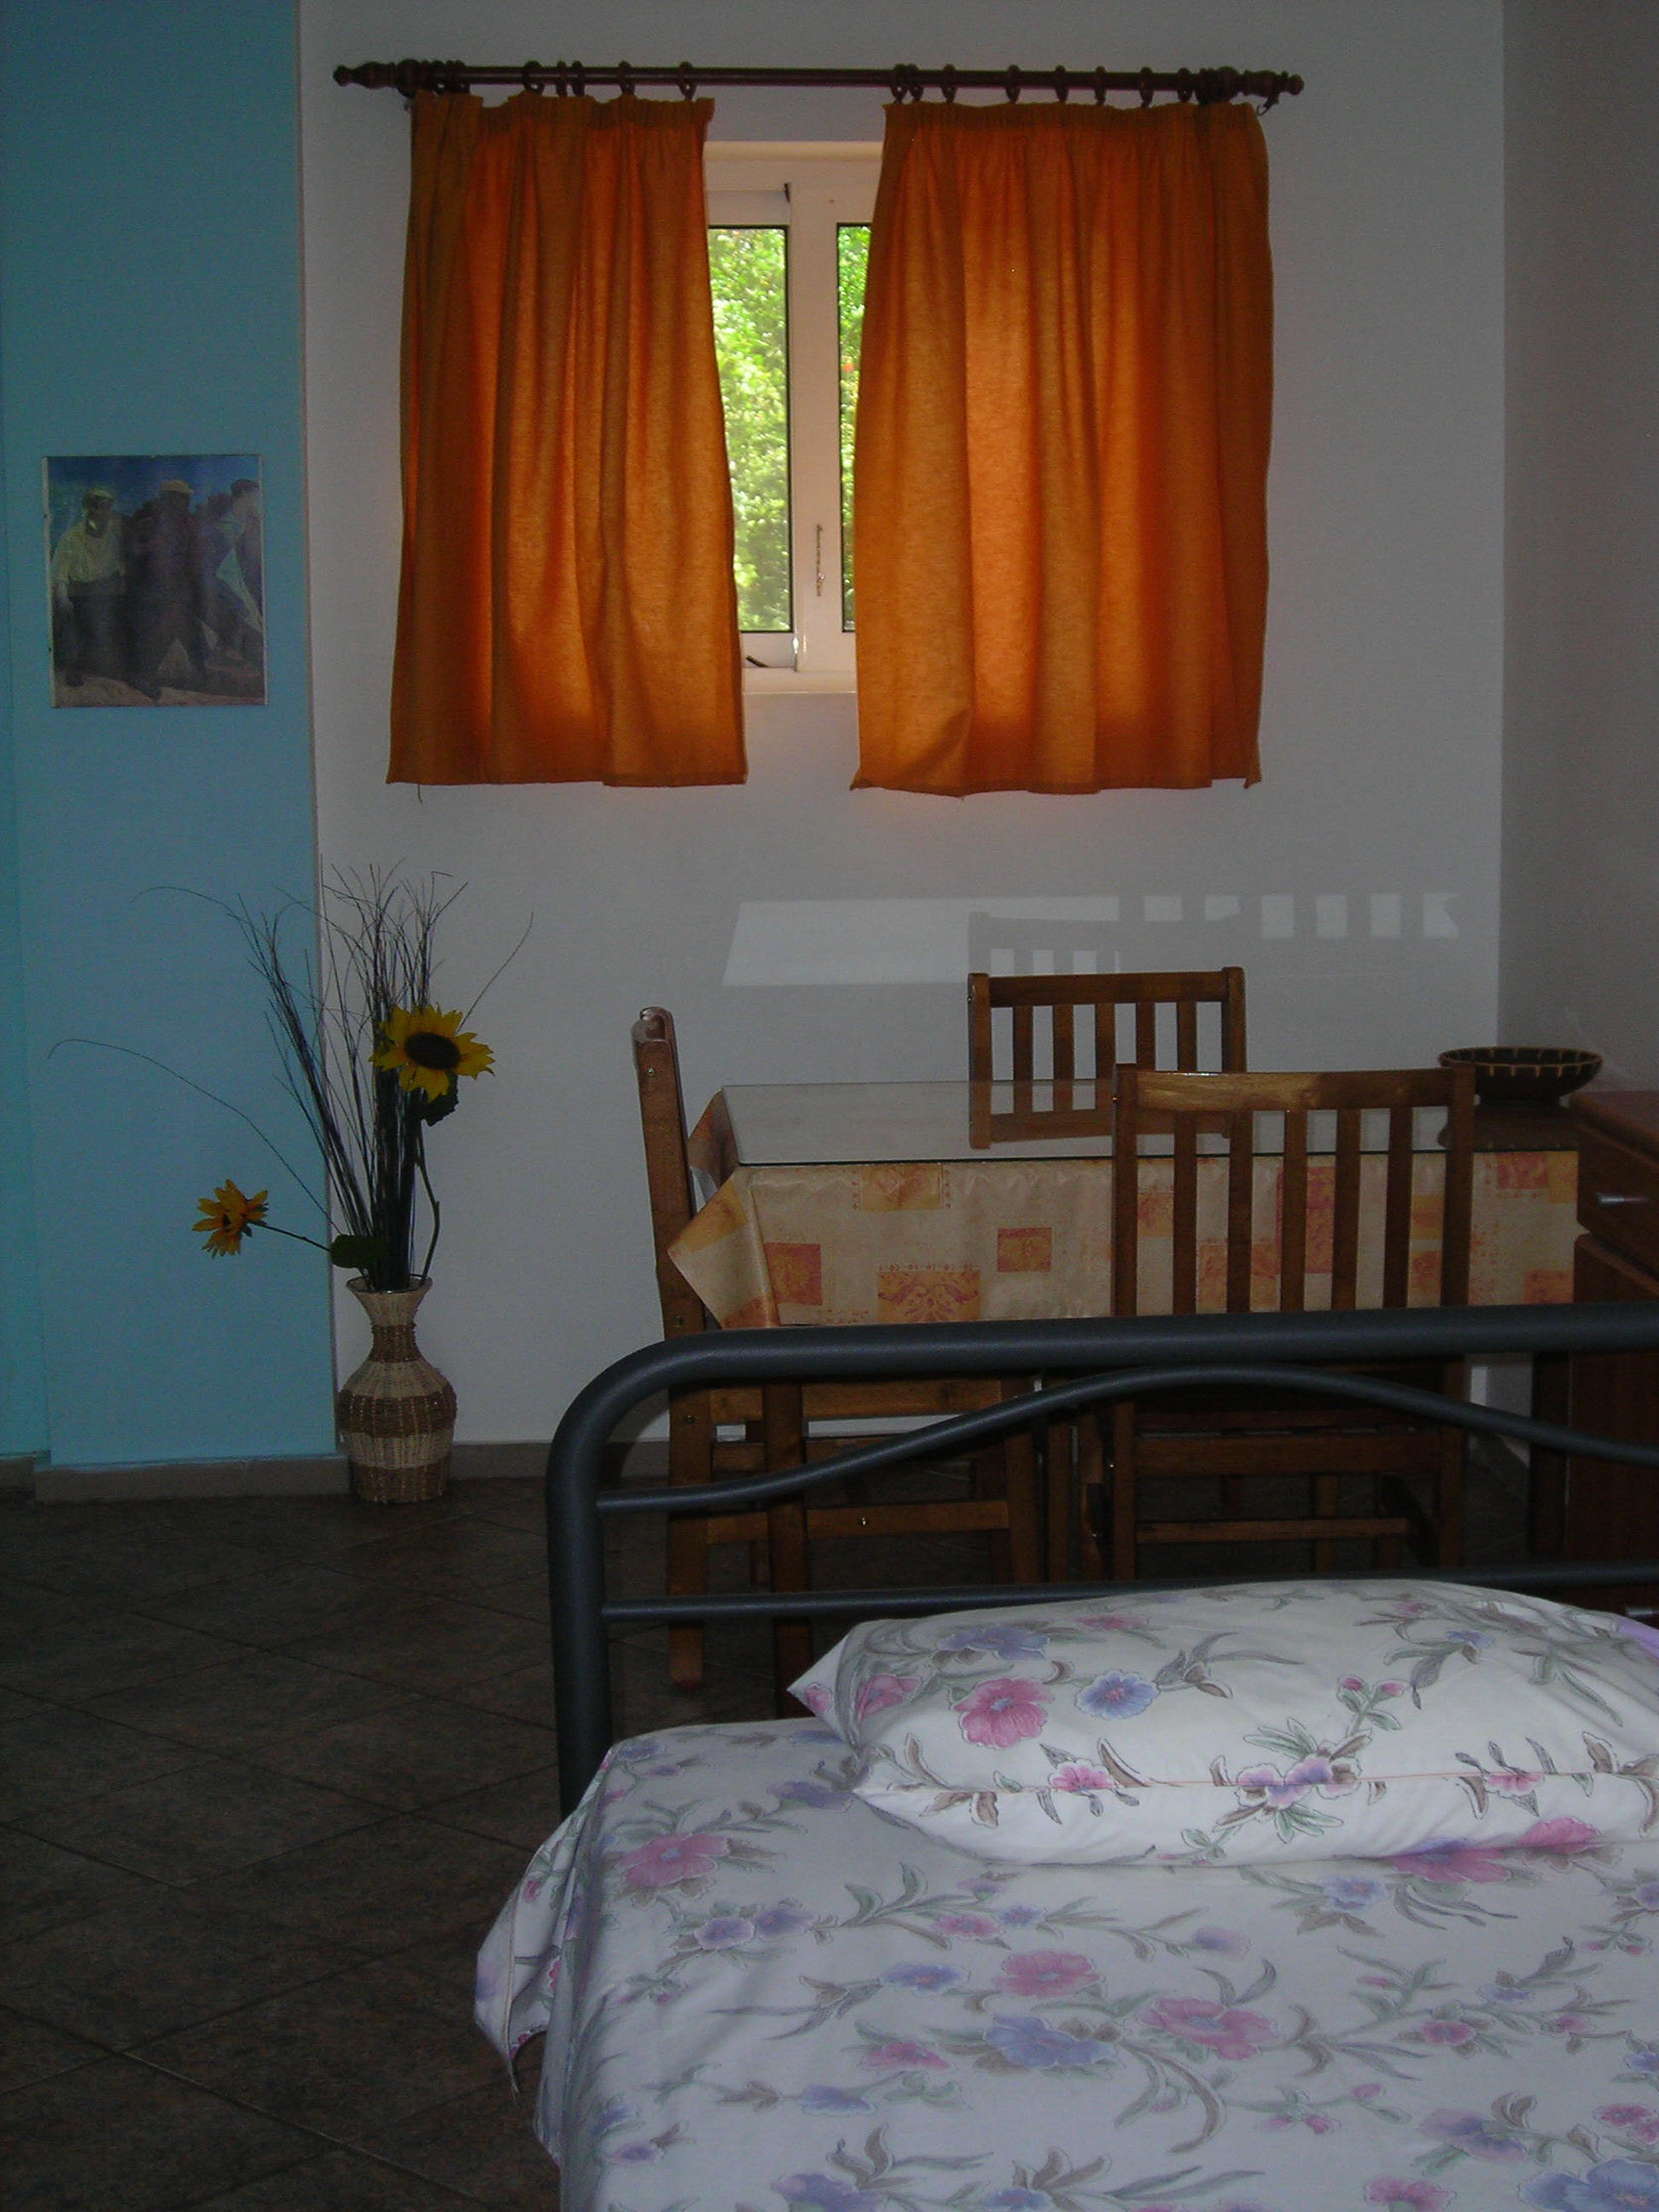 Private rooms for rent in Athens, Greece